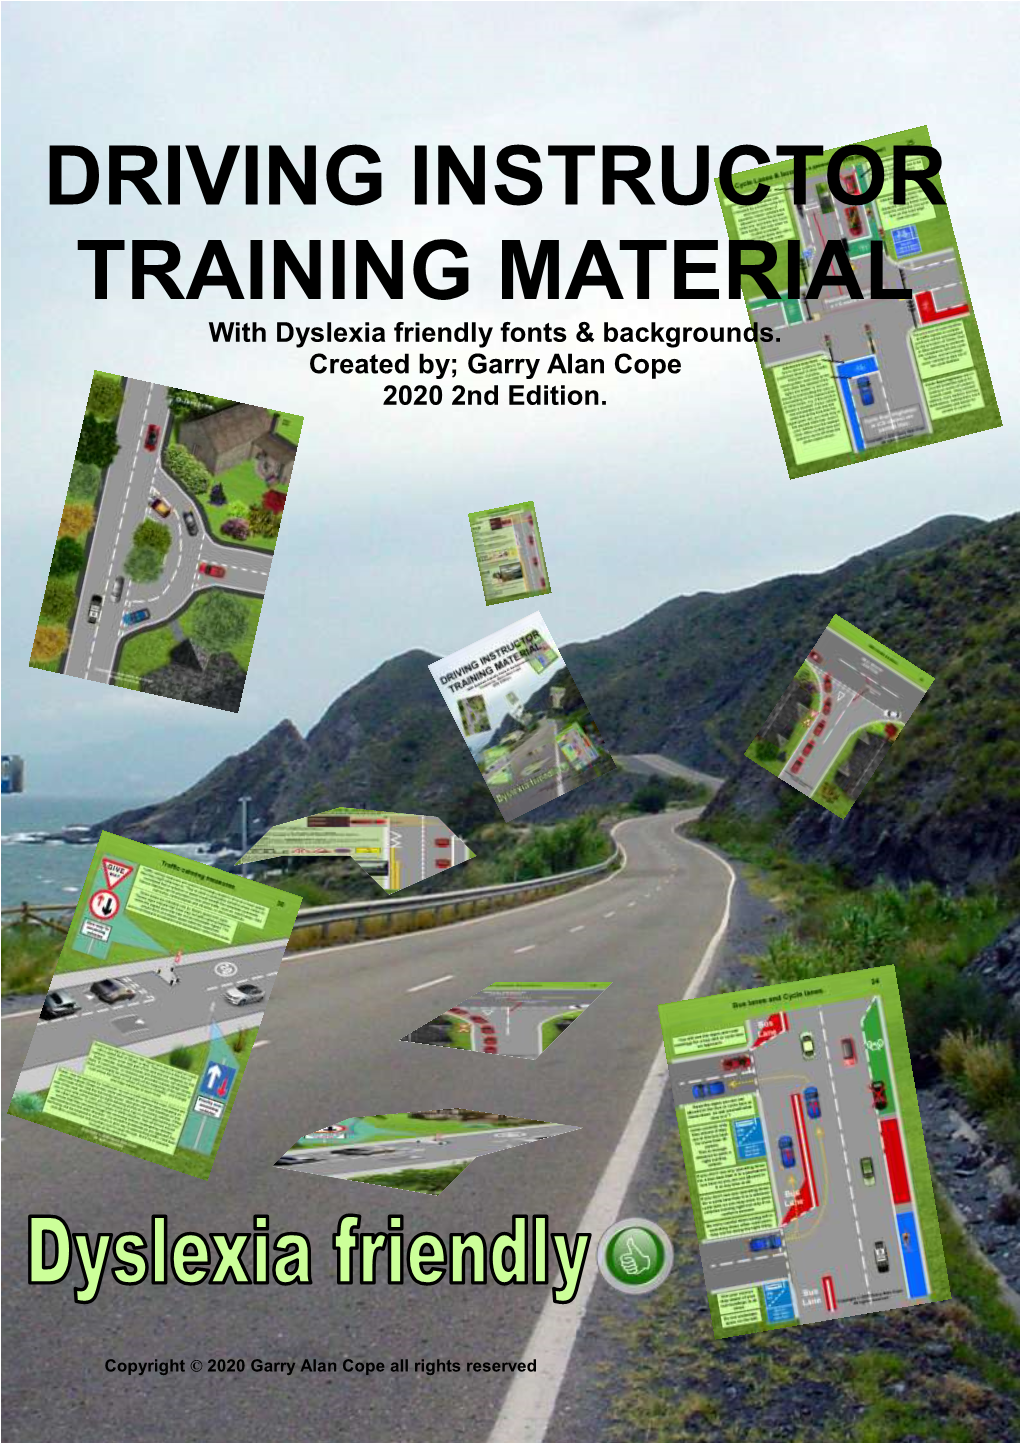 Driving Instructor Training Material